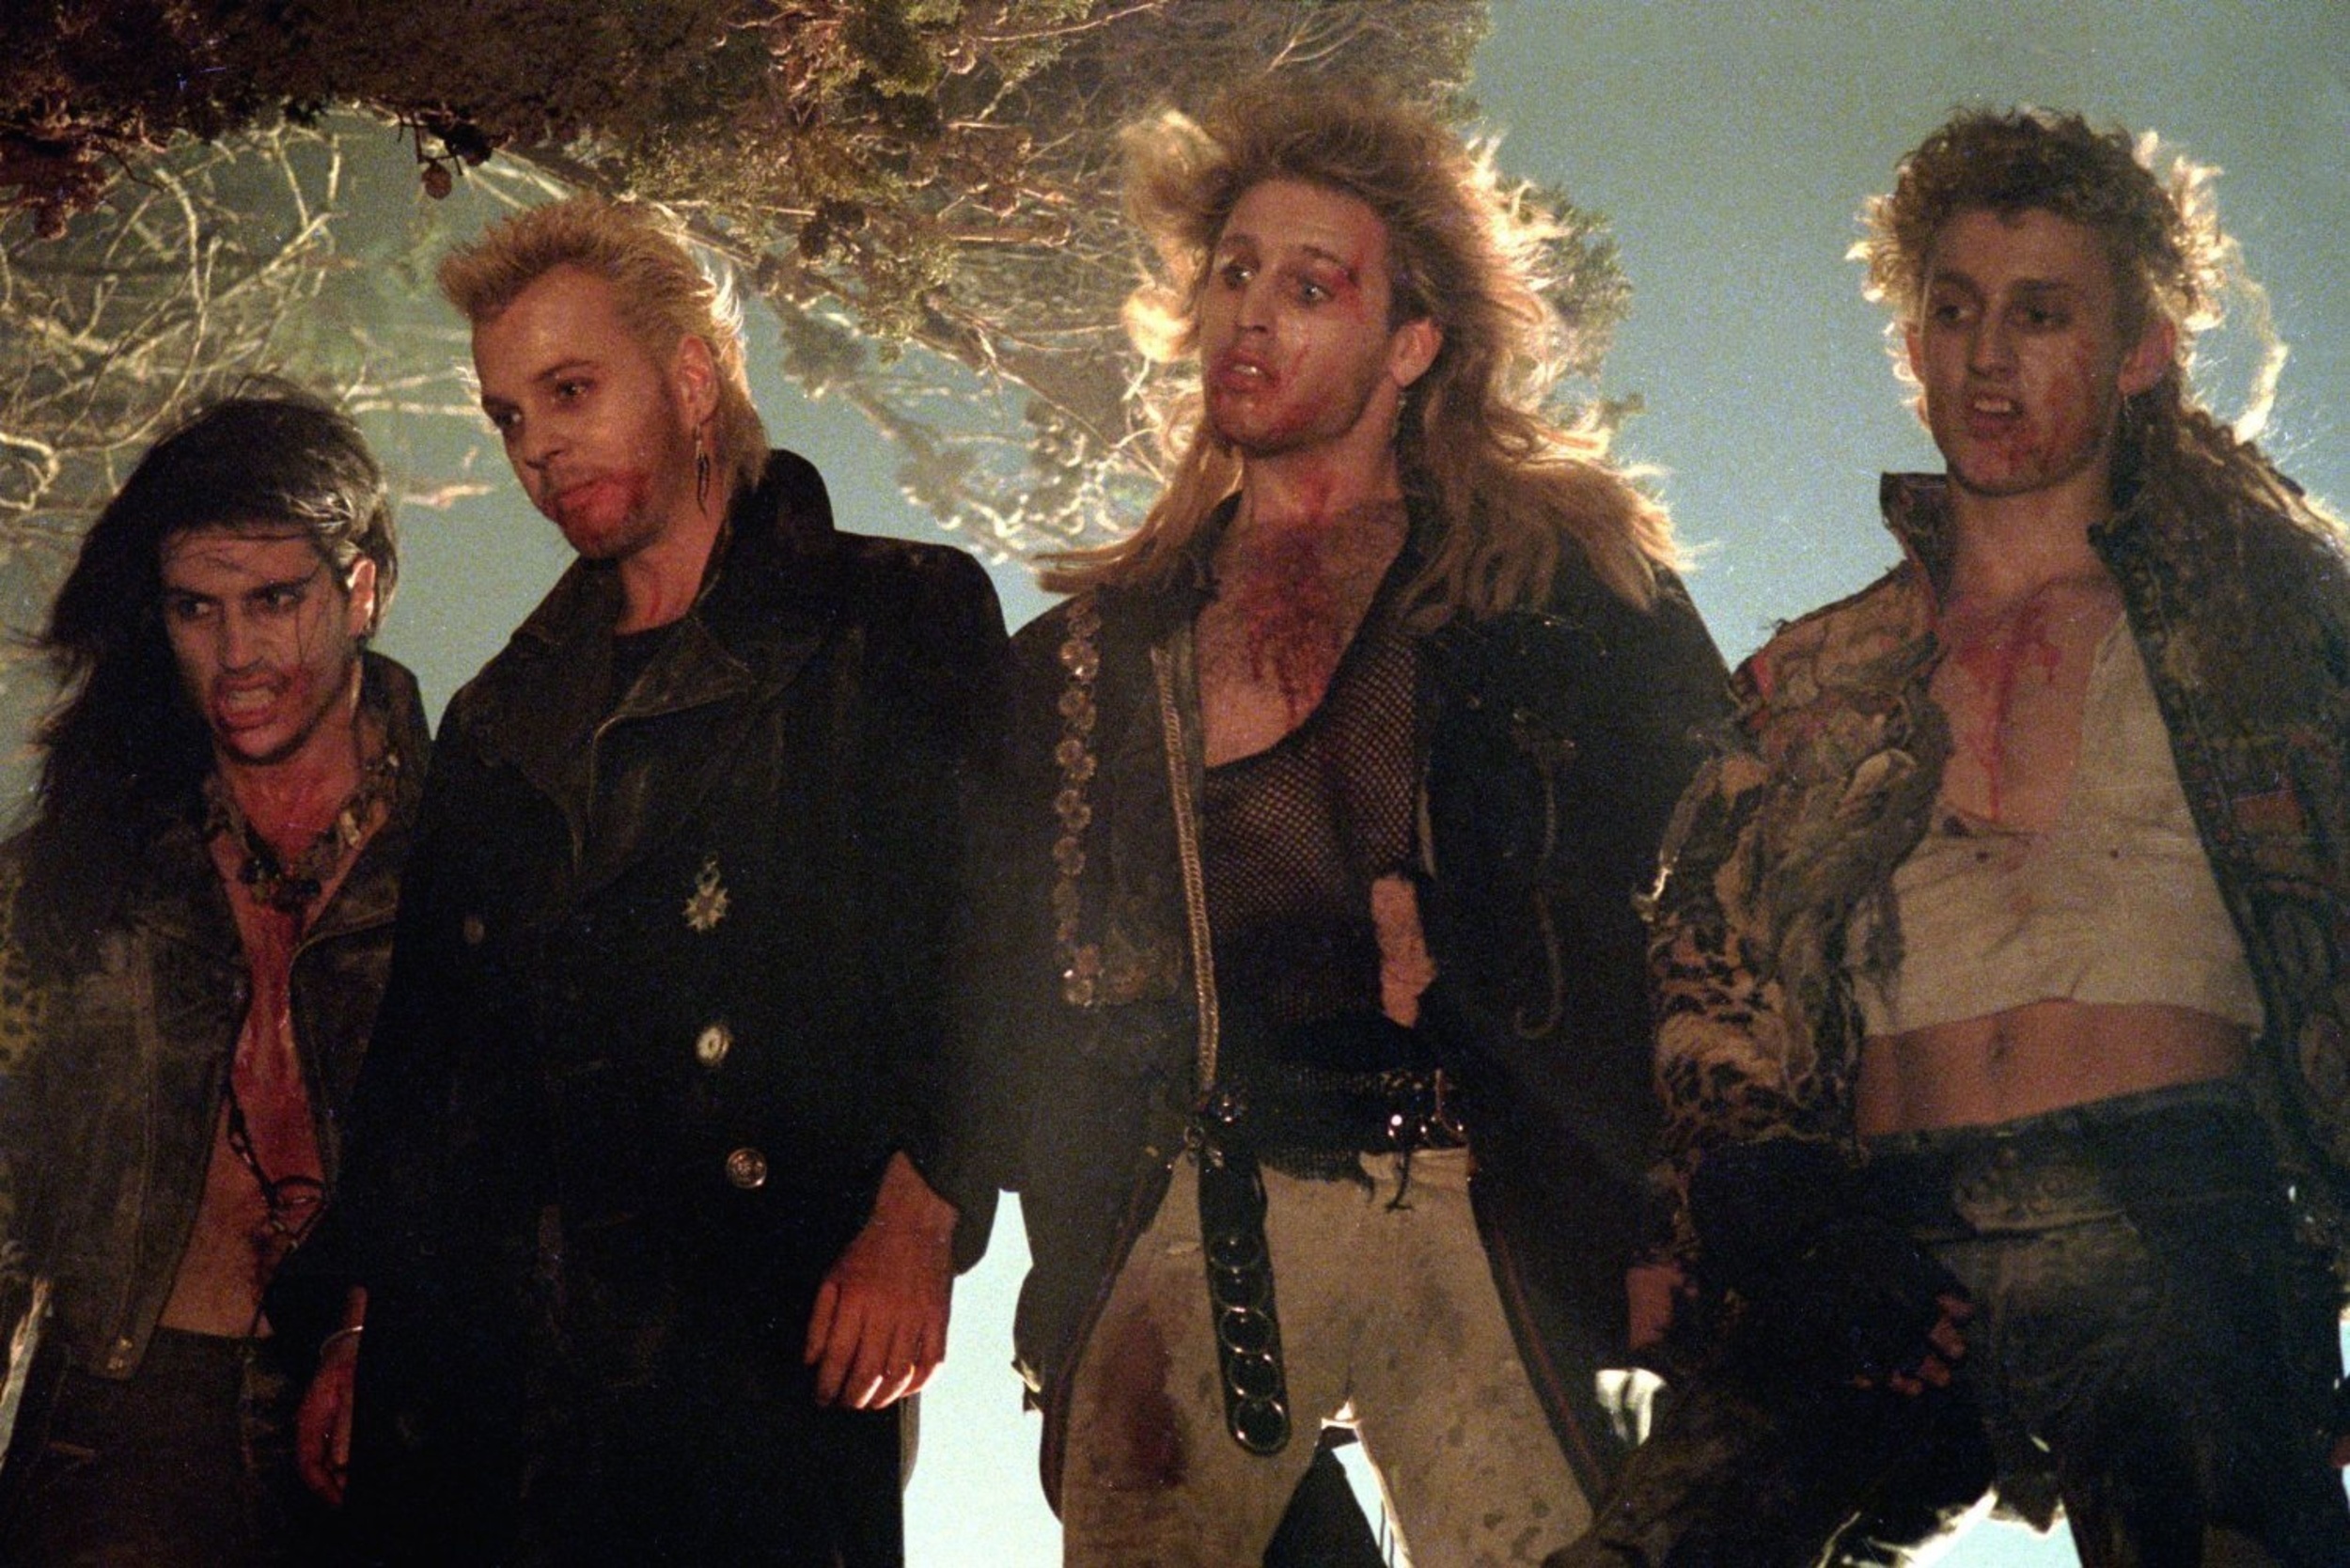 <p>A vampire flick with bite... and abs. <em>The Lost Boys</em> sees a bunch of teenage vampires search for food in a small town.</p><p>You may also like: <a href='https://www.yardbarker.com/entertainment/articles/the_james_bond_movies_ranked_031224/s1__28562294'>The James Bond movies, ranked</a></p>